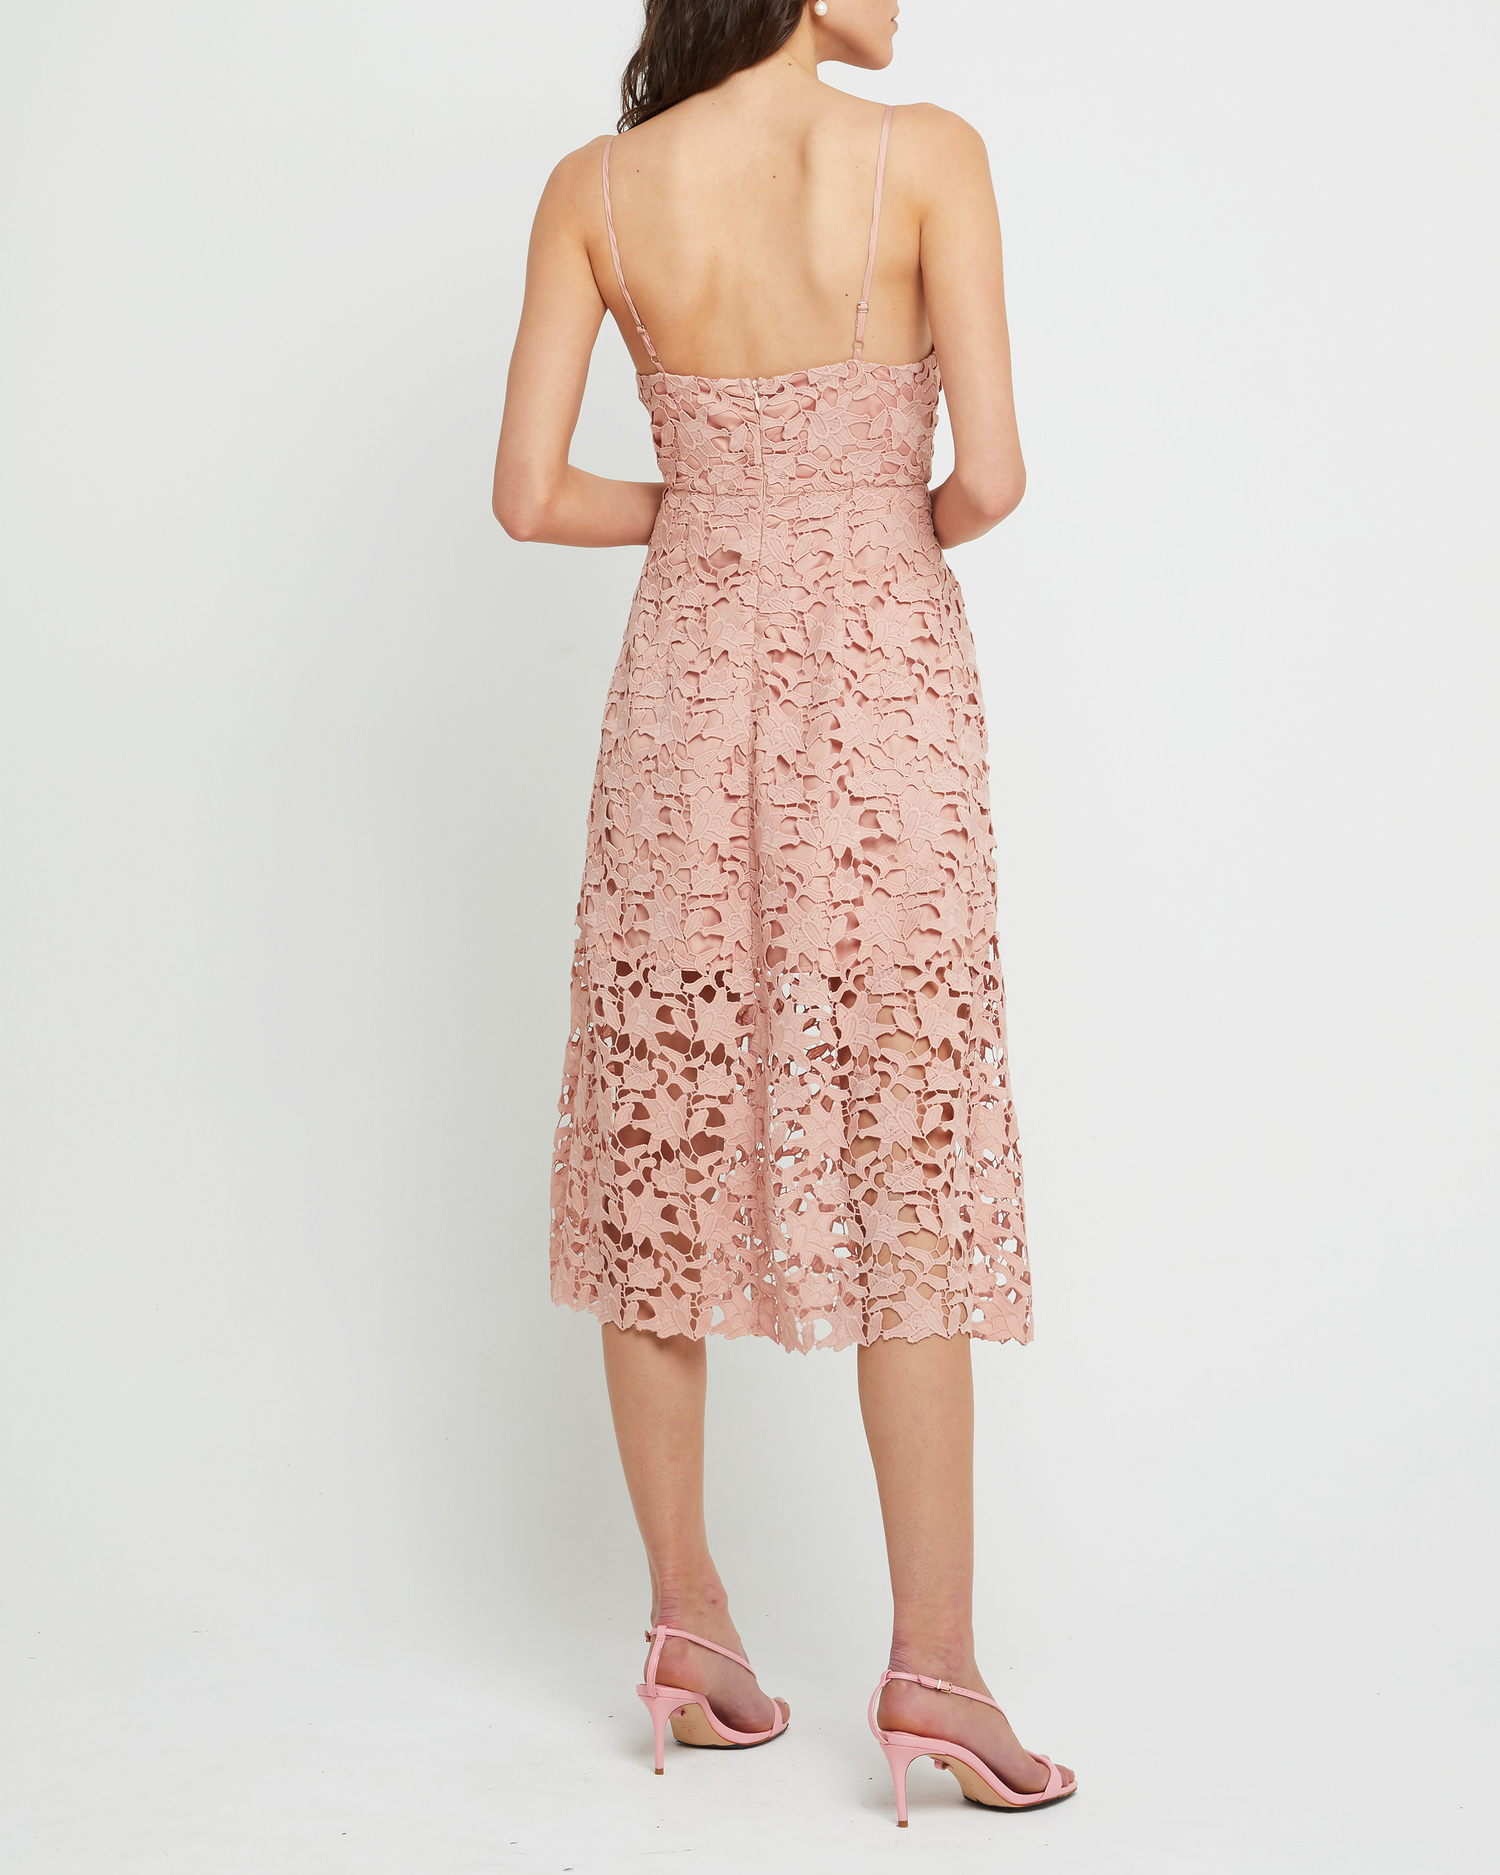 Second image of Arabella Dress, a pink modern lace midi-length bridesmaid dress with deep v-neckline, inner lining, adjustable straps, and a back zipper